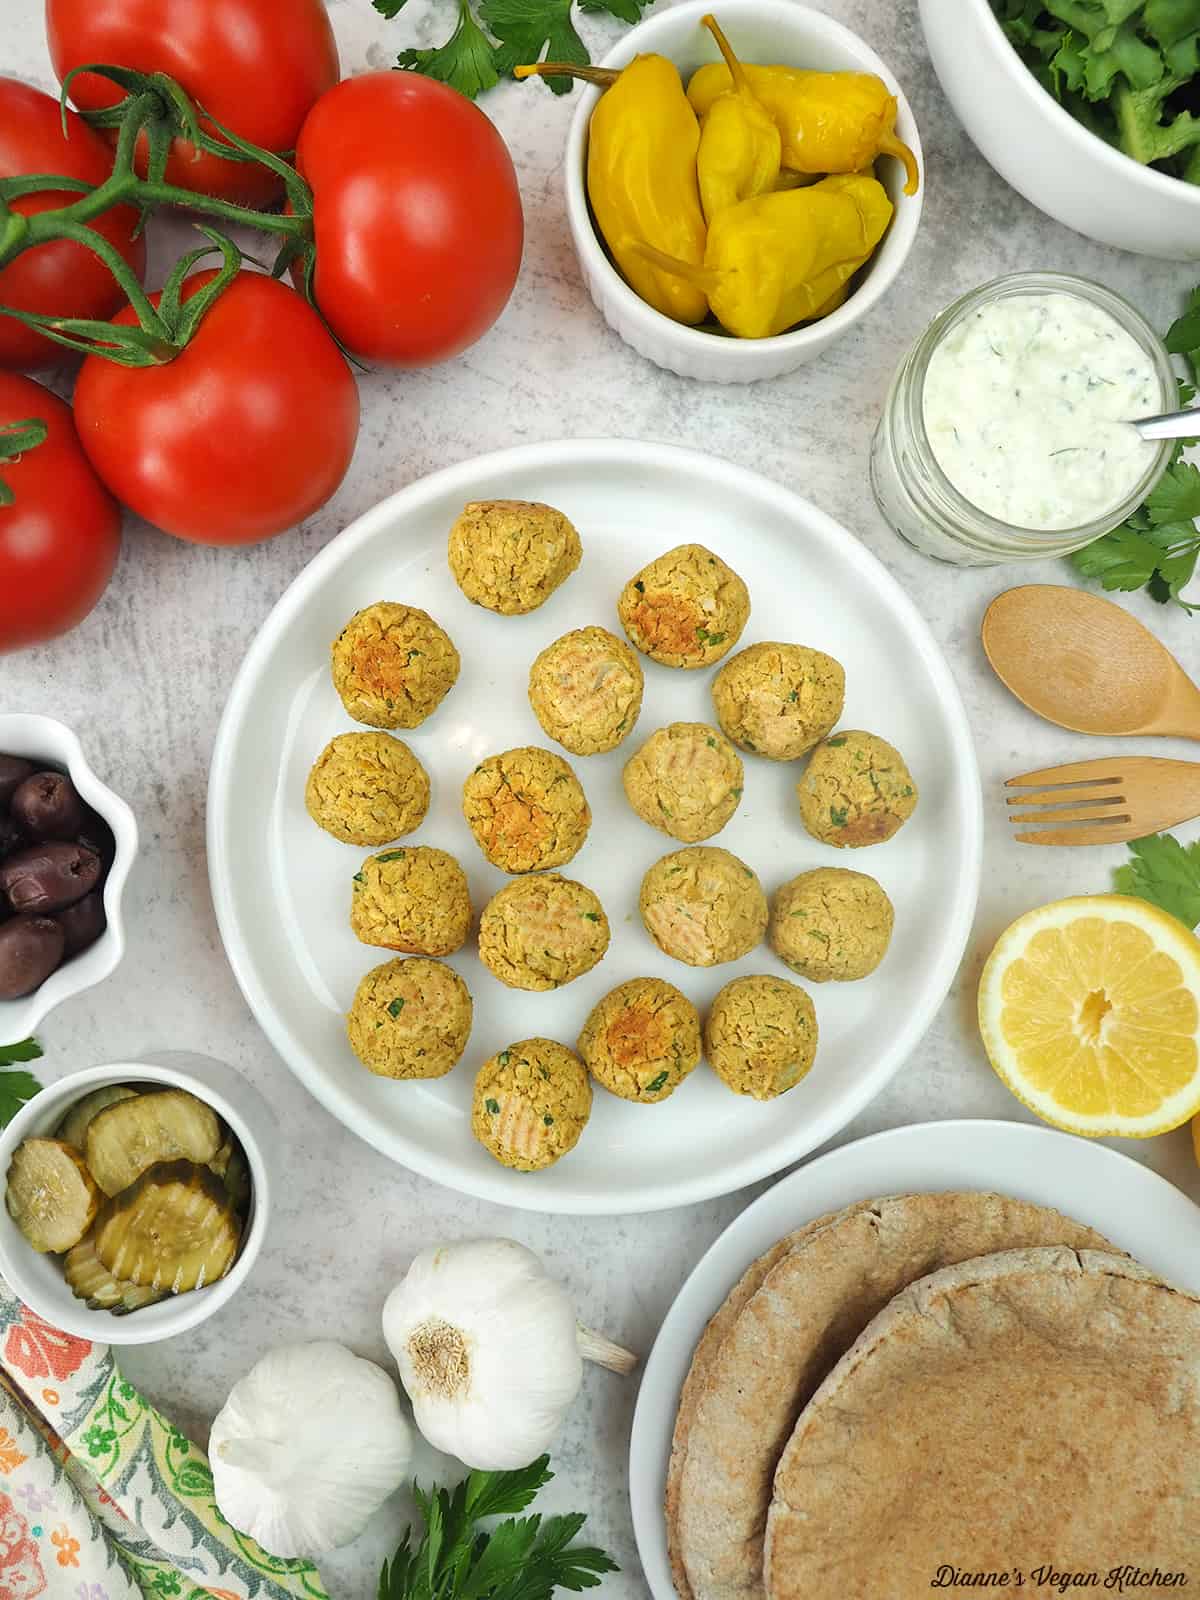 baked falafel balls on plate surrounded by peppers, tomatoes, sauce, lemons, garlic, olives, pickles, and pita bread